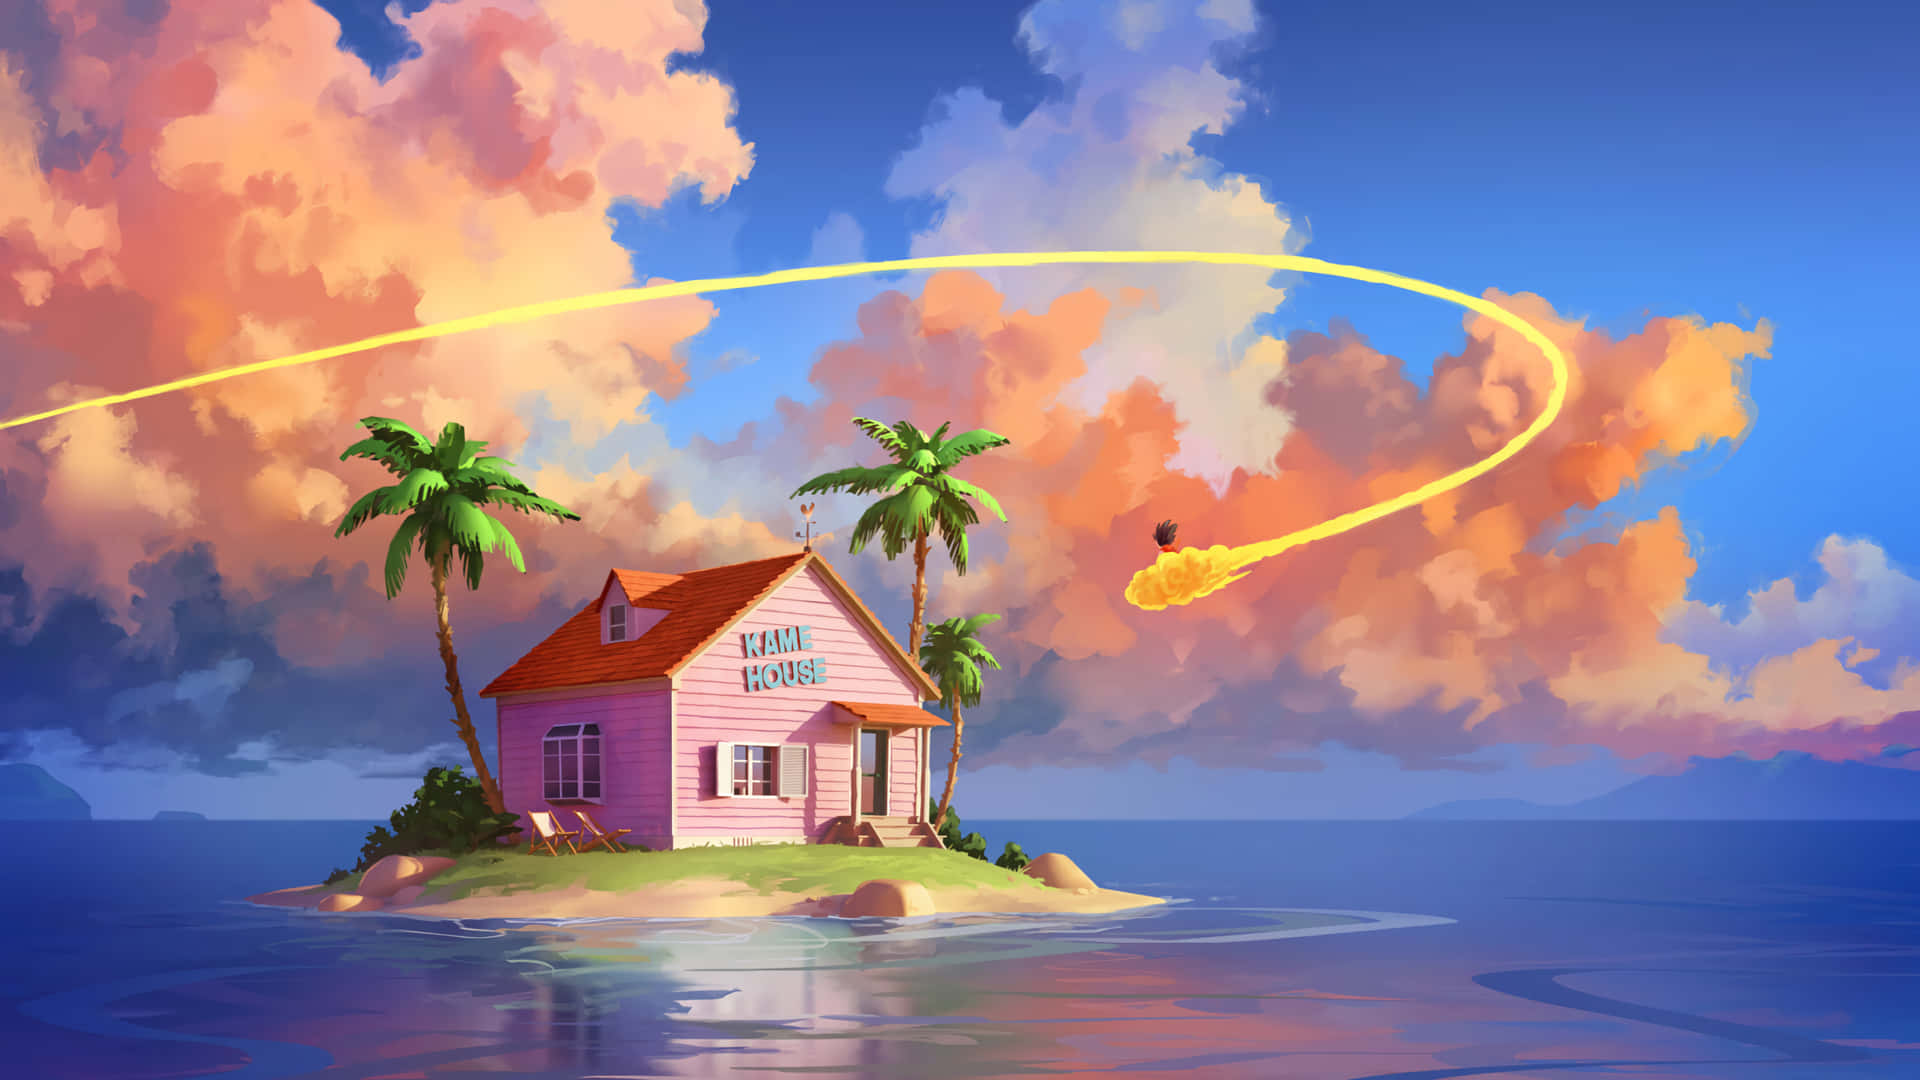 A Pink House On An Island With Palm Trees And Clouds